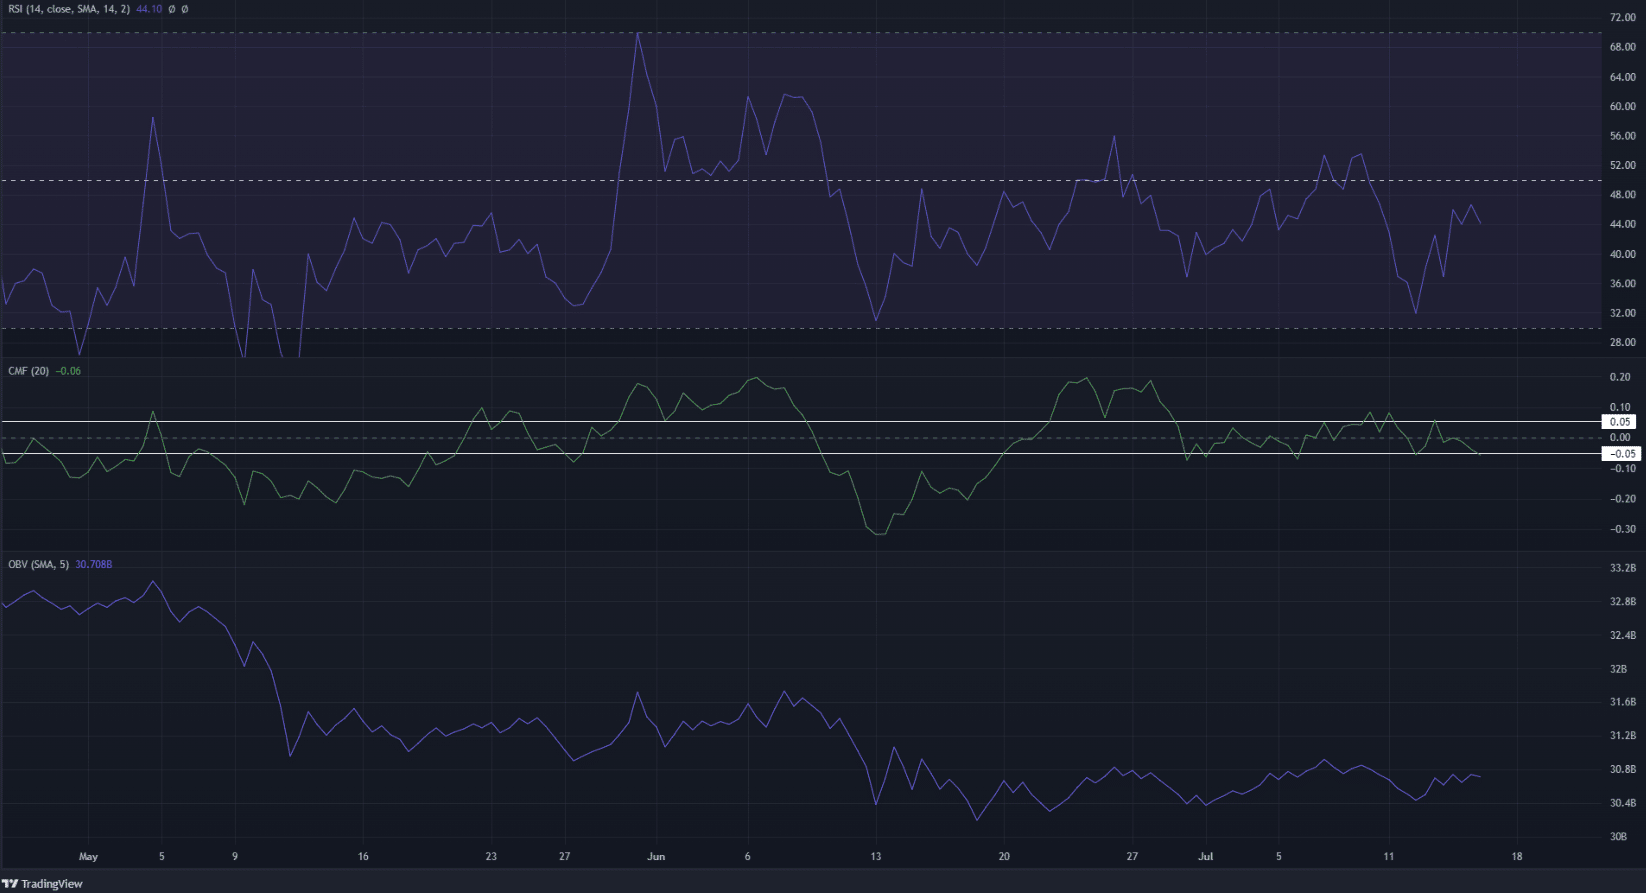 Cardano bears have cause to celebrate as they attempt to force another move down the price chart